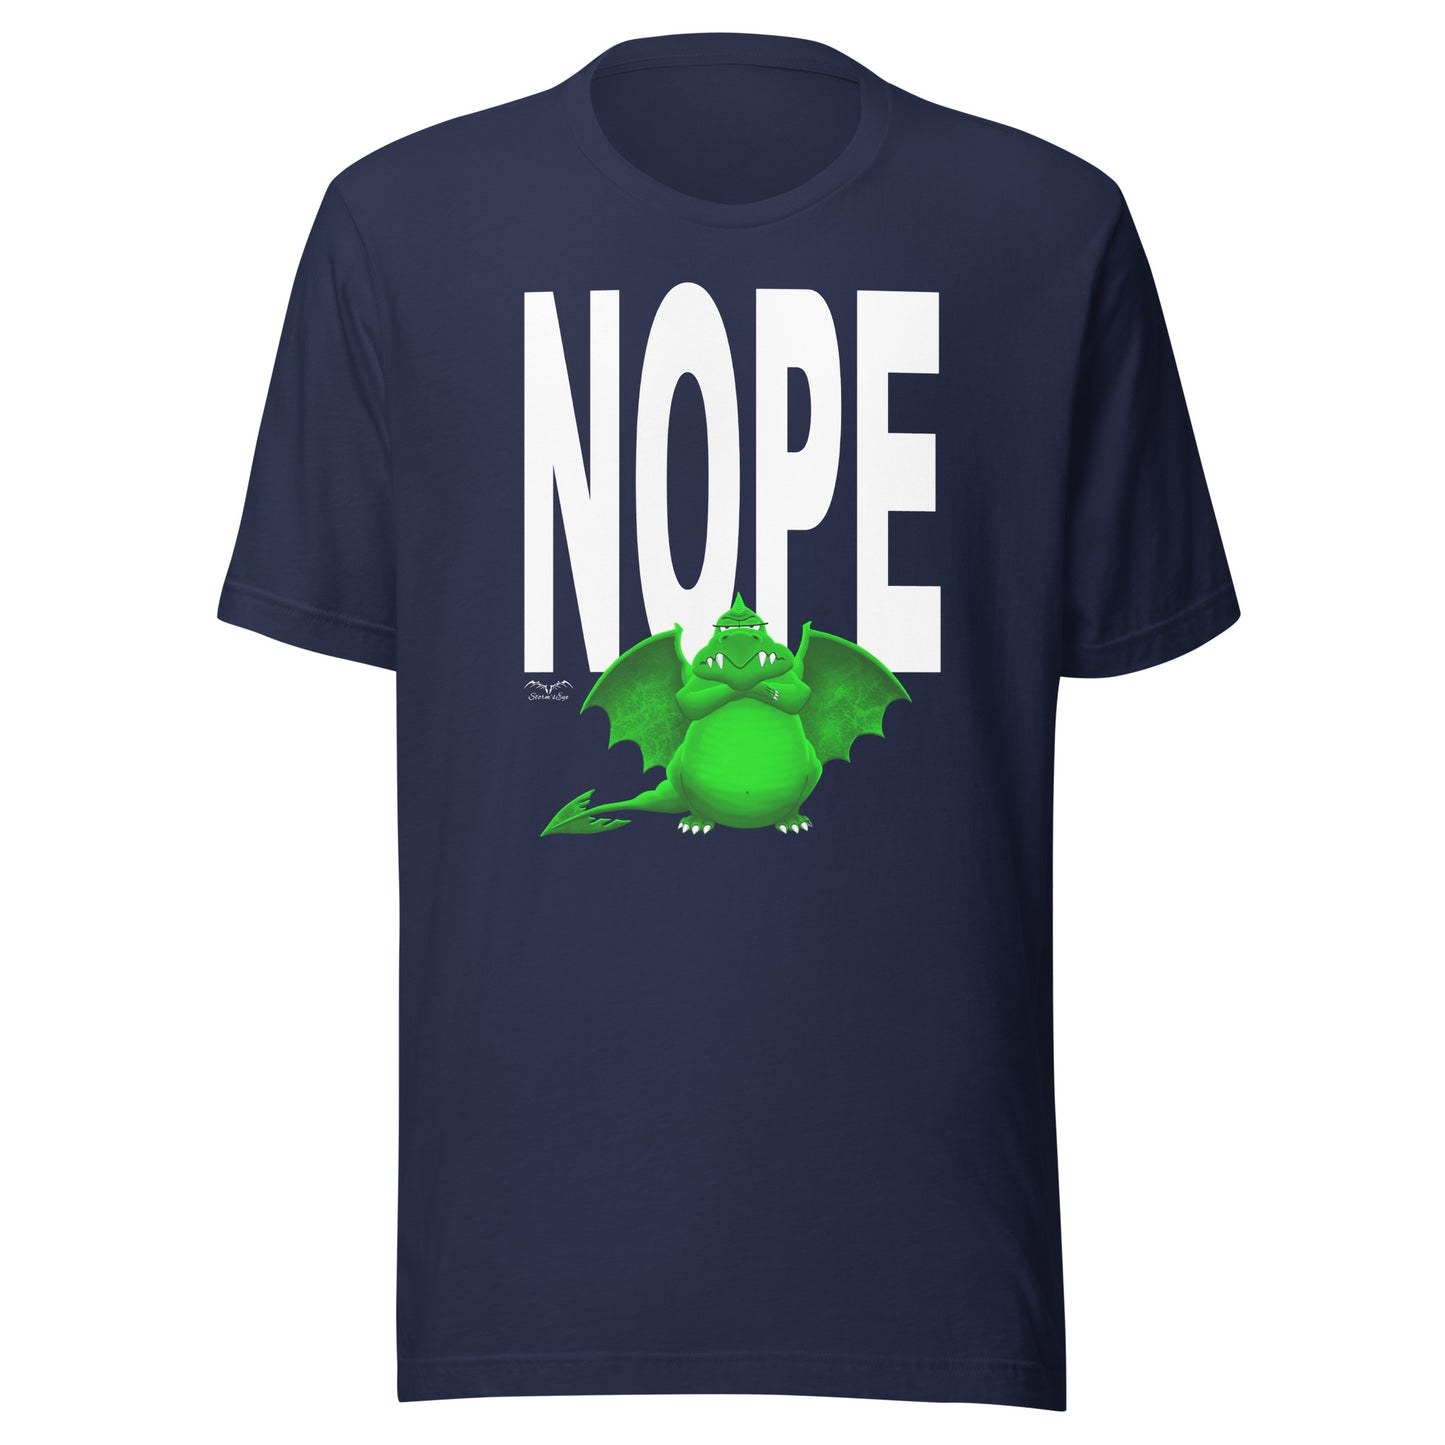 nope dragon bouncer t-shirt, navy blue, by Stormseye Design